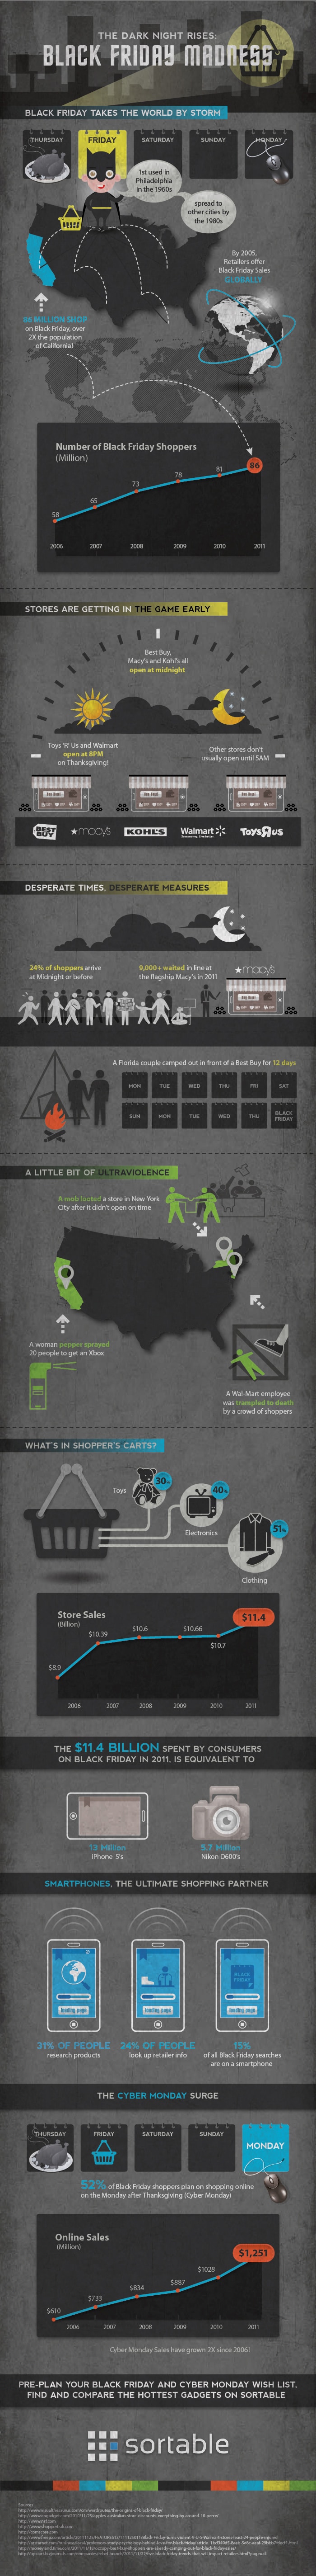 black-friday-shopping-tips-infographic